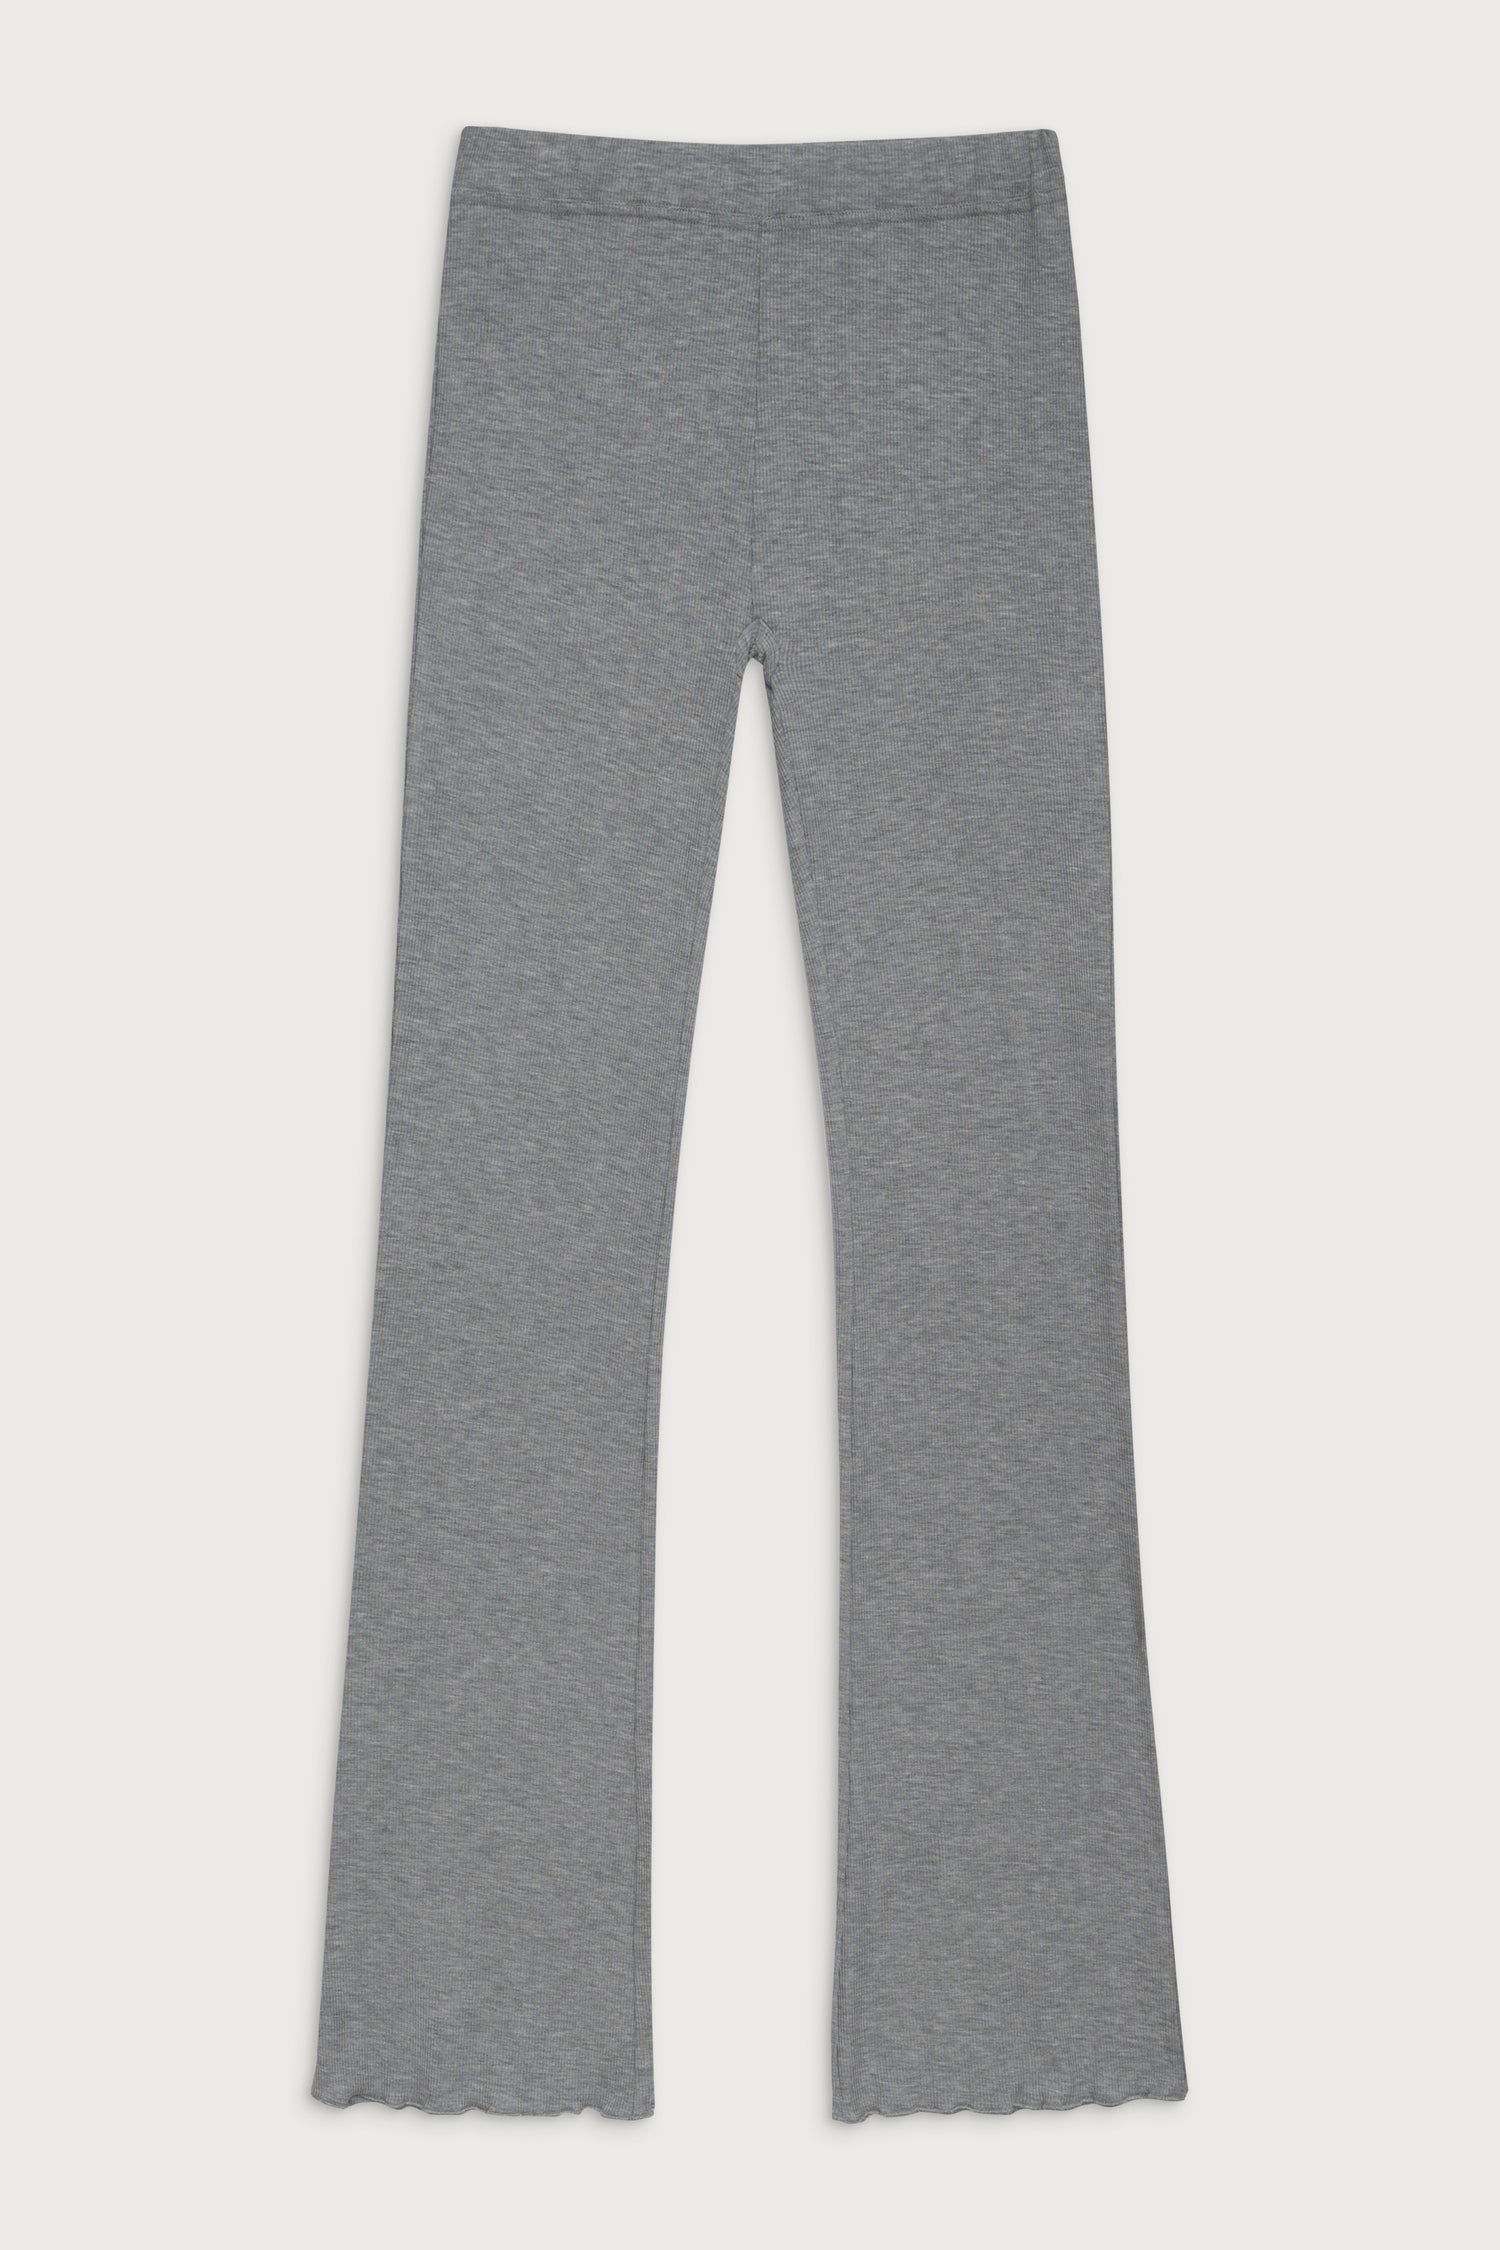 Grey Slinky Low Rise Flared Pants